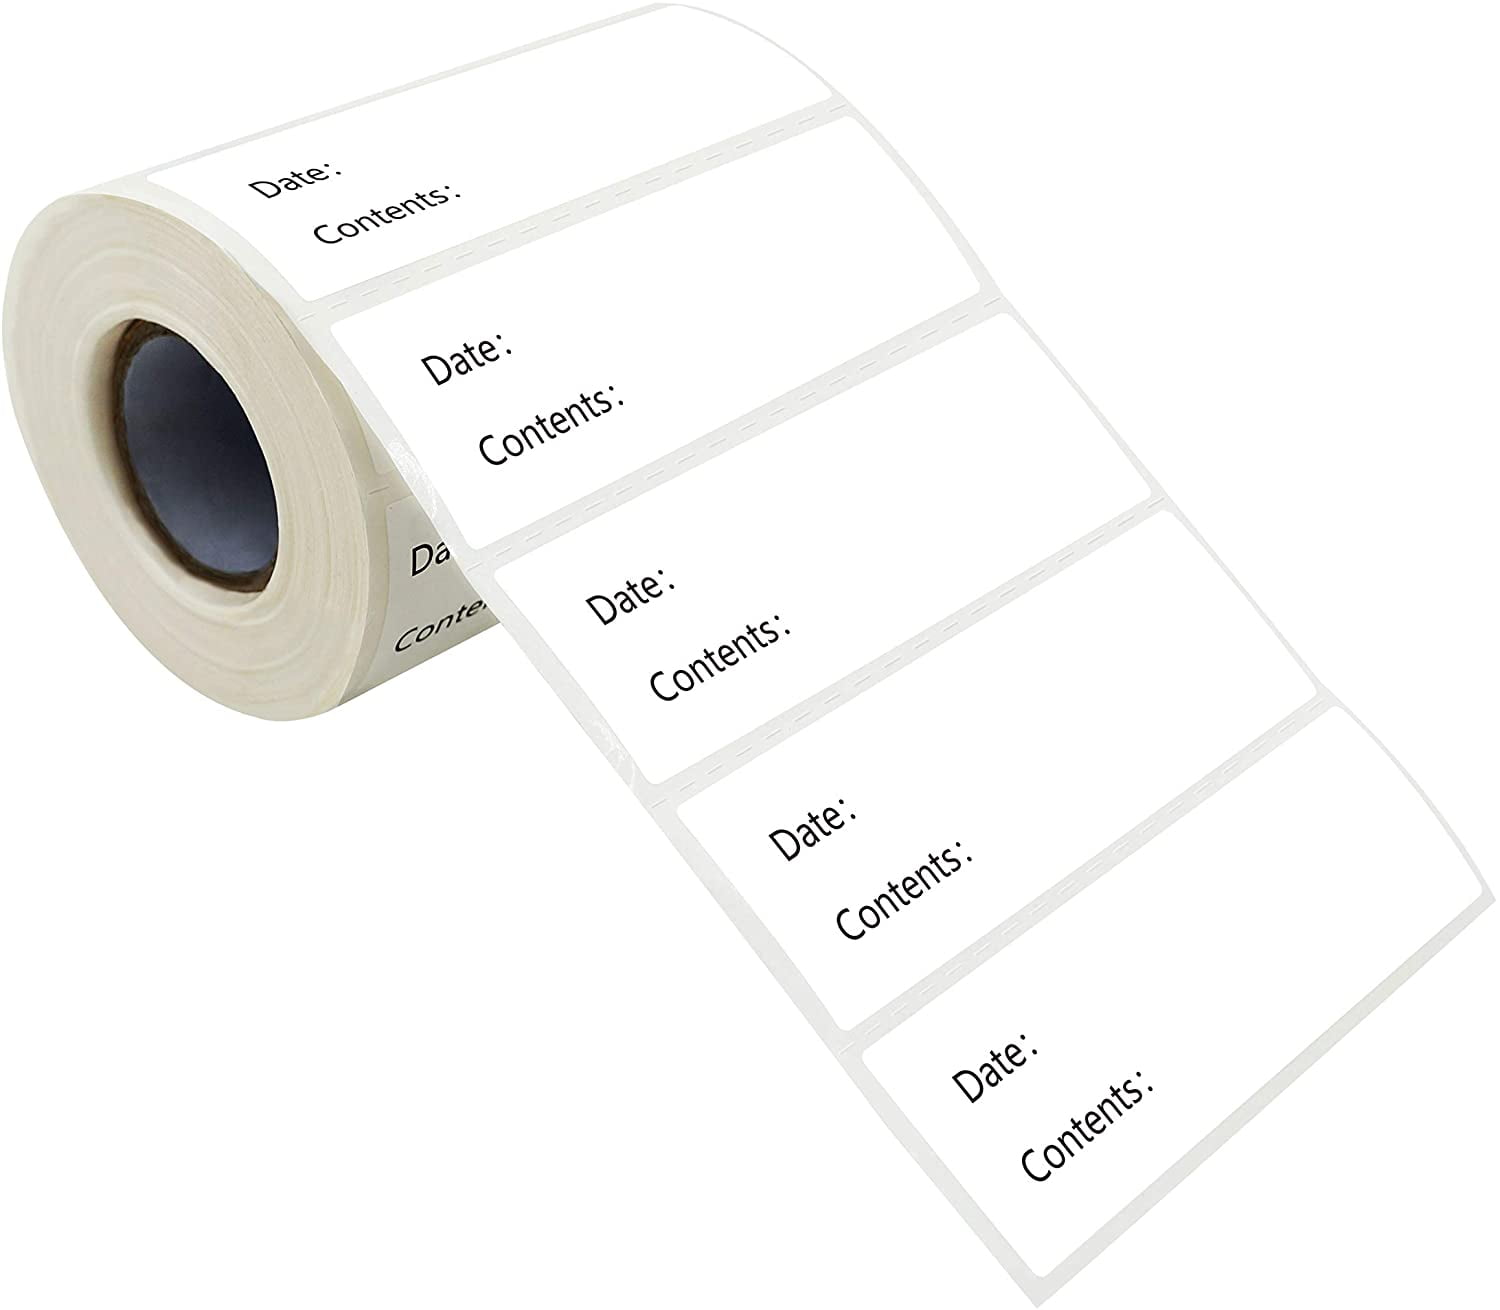 Food Flavor Labels .625" x 1.25" 1000 labels per roll Stickers Large Variety 